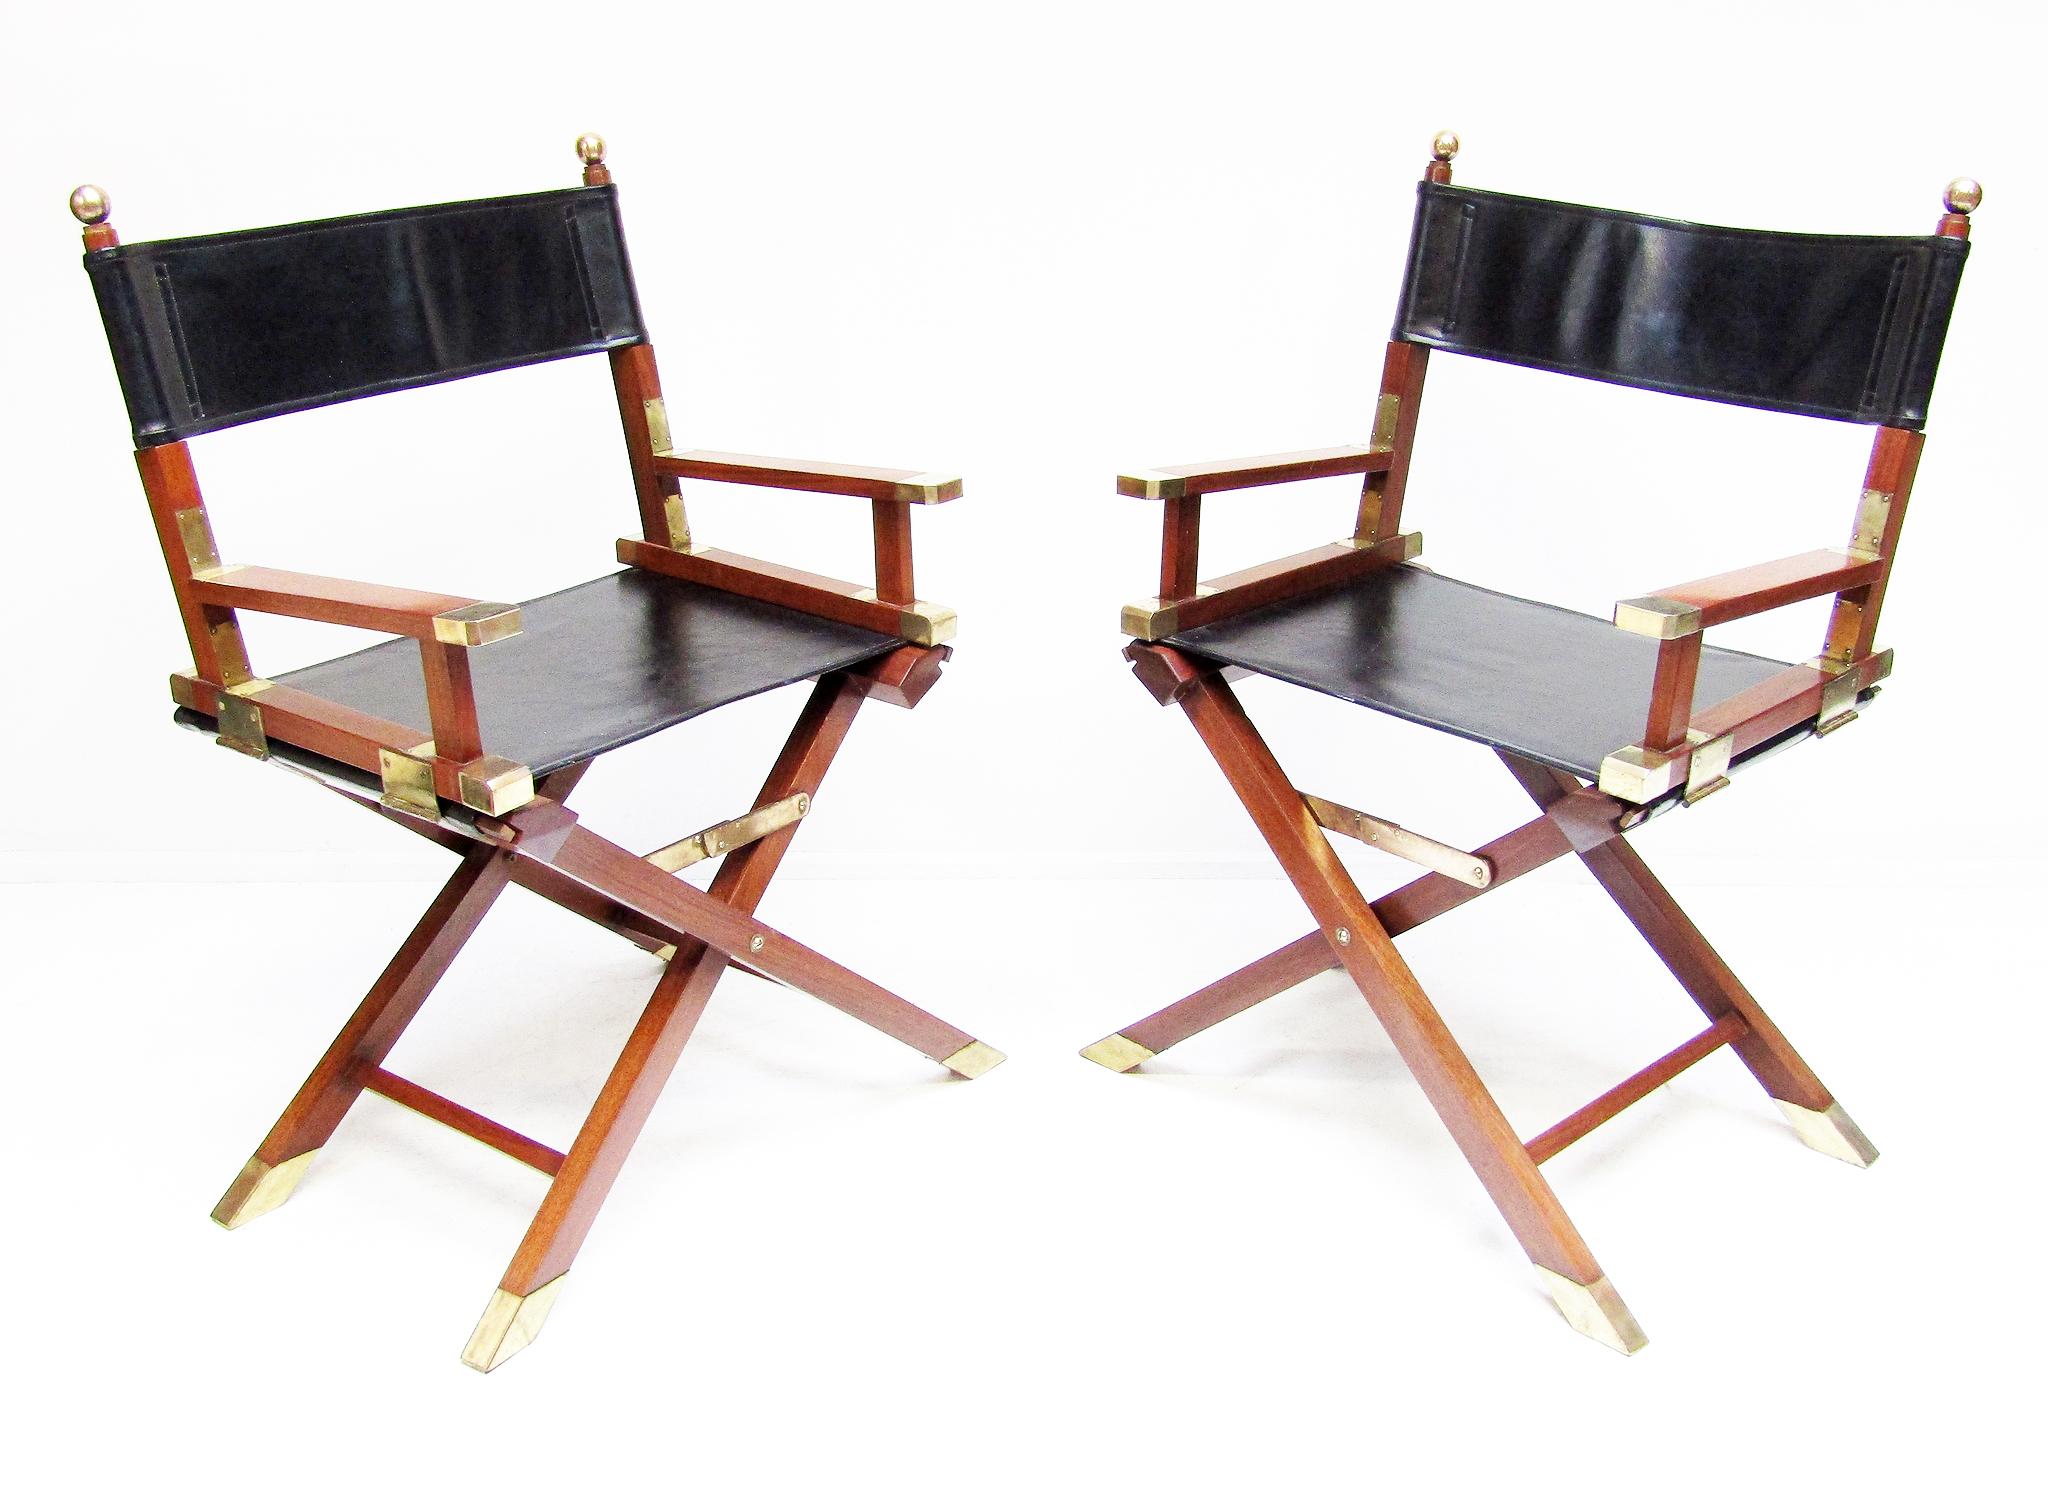 Hong Kong 1960s Campaign Safari Chairs in Brass, Mahogany & Leather by Charlotte Horstmann